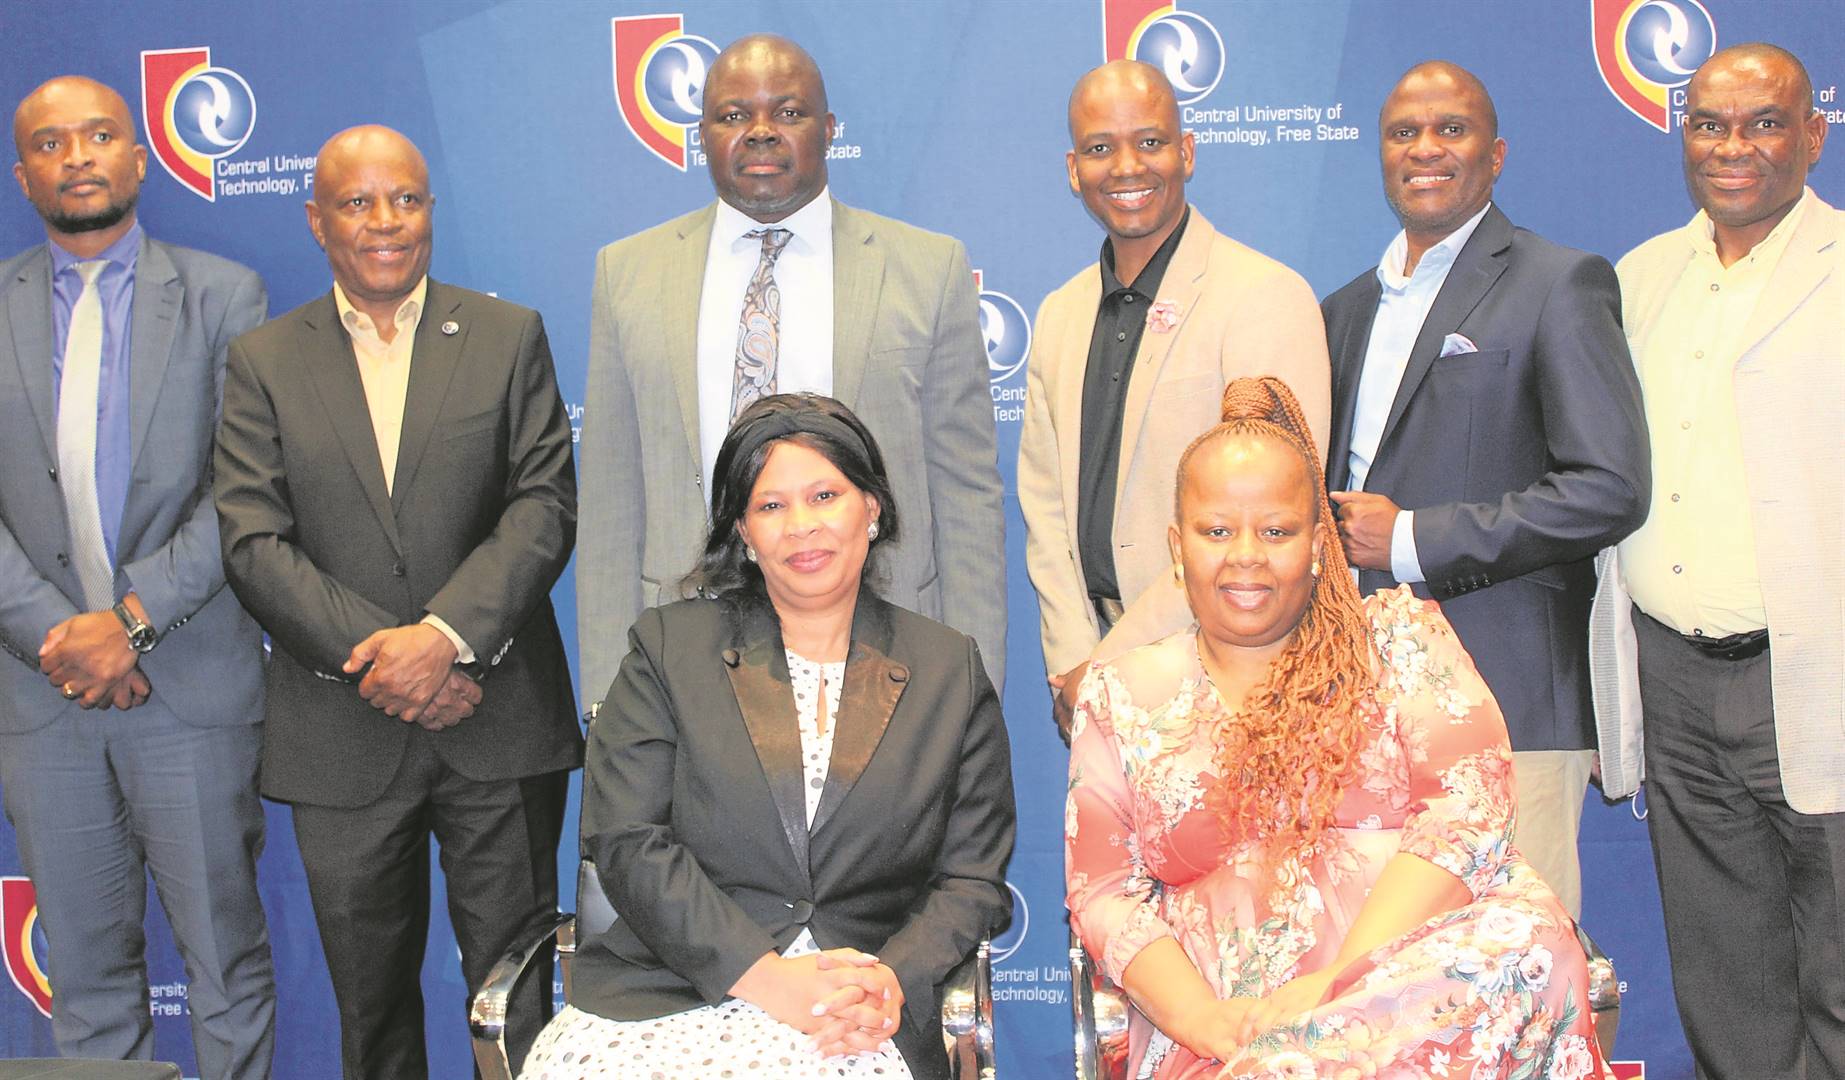 At the recent consultation between the National Student Financial Aid Scheme (NSFAS) and the Central University of Technology (CUT), Free State, are from the left, front: Dr Sally Dzingwa (CUT registrar) and Matseliso Mfanta (CUT chairperson); back: Andile Nongogo (NSFAS chief executive officer), Prof. Alfred Ngowi (CUT acting vice-chancellor), Ernest Khosa (NSFAS chairperson), Matthew Rantso (chairperson of the CUT’s council), Prof. David Ngidi (CUT deputy vice-chancellor for teaching and learning) and Moeketsi Sefika (chairperson of the council’s committee for planning, finance and resources). Photo: Supplied